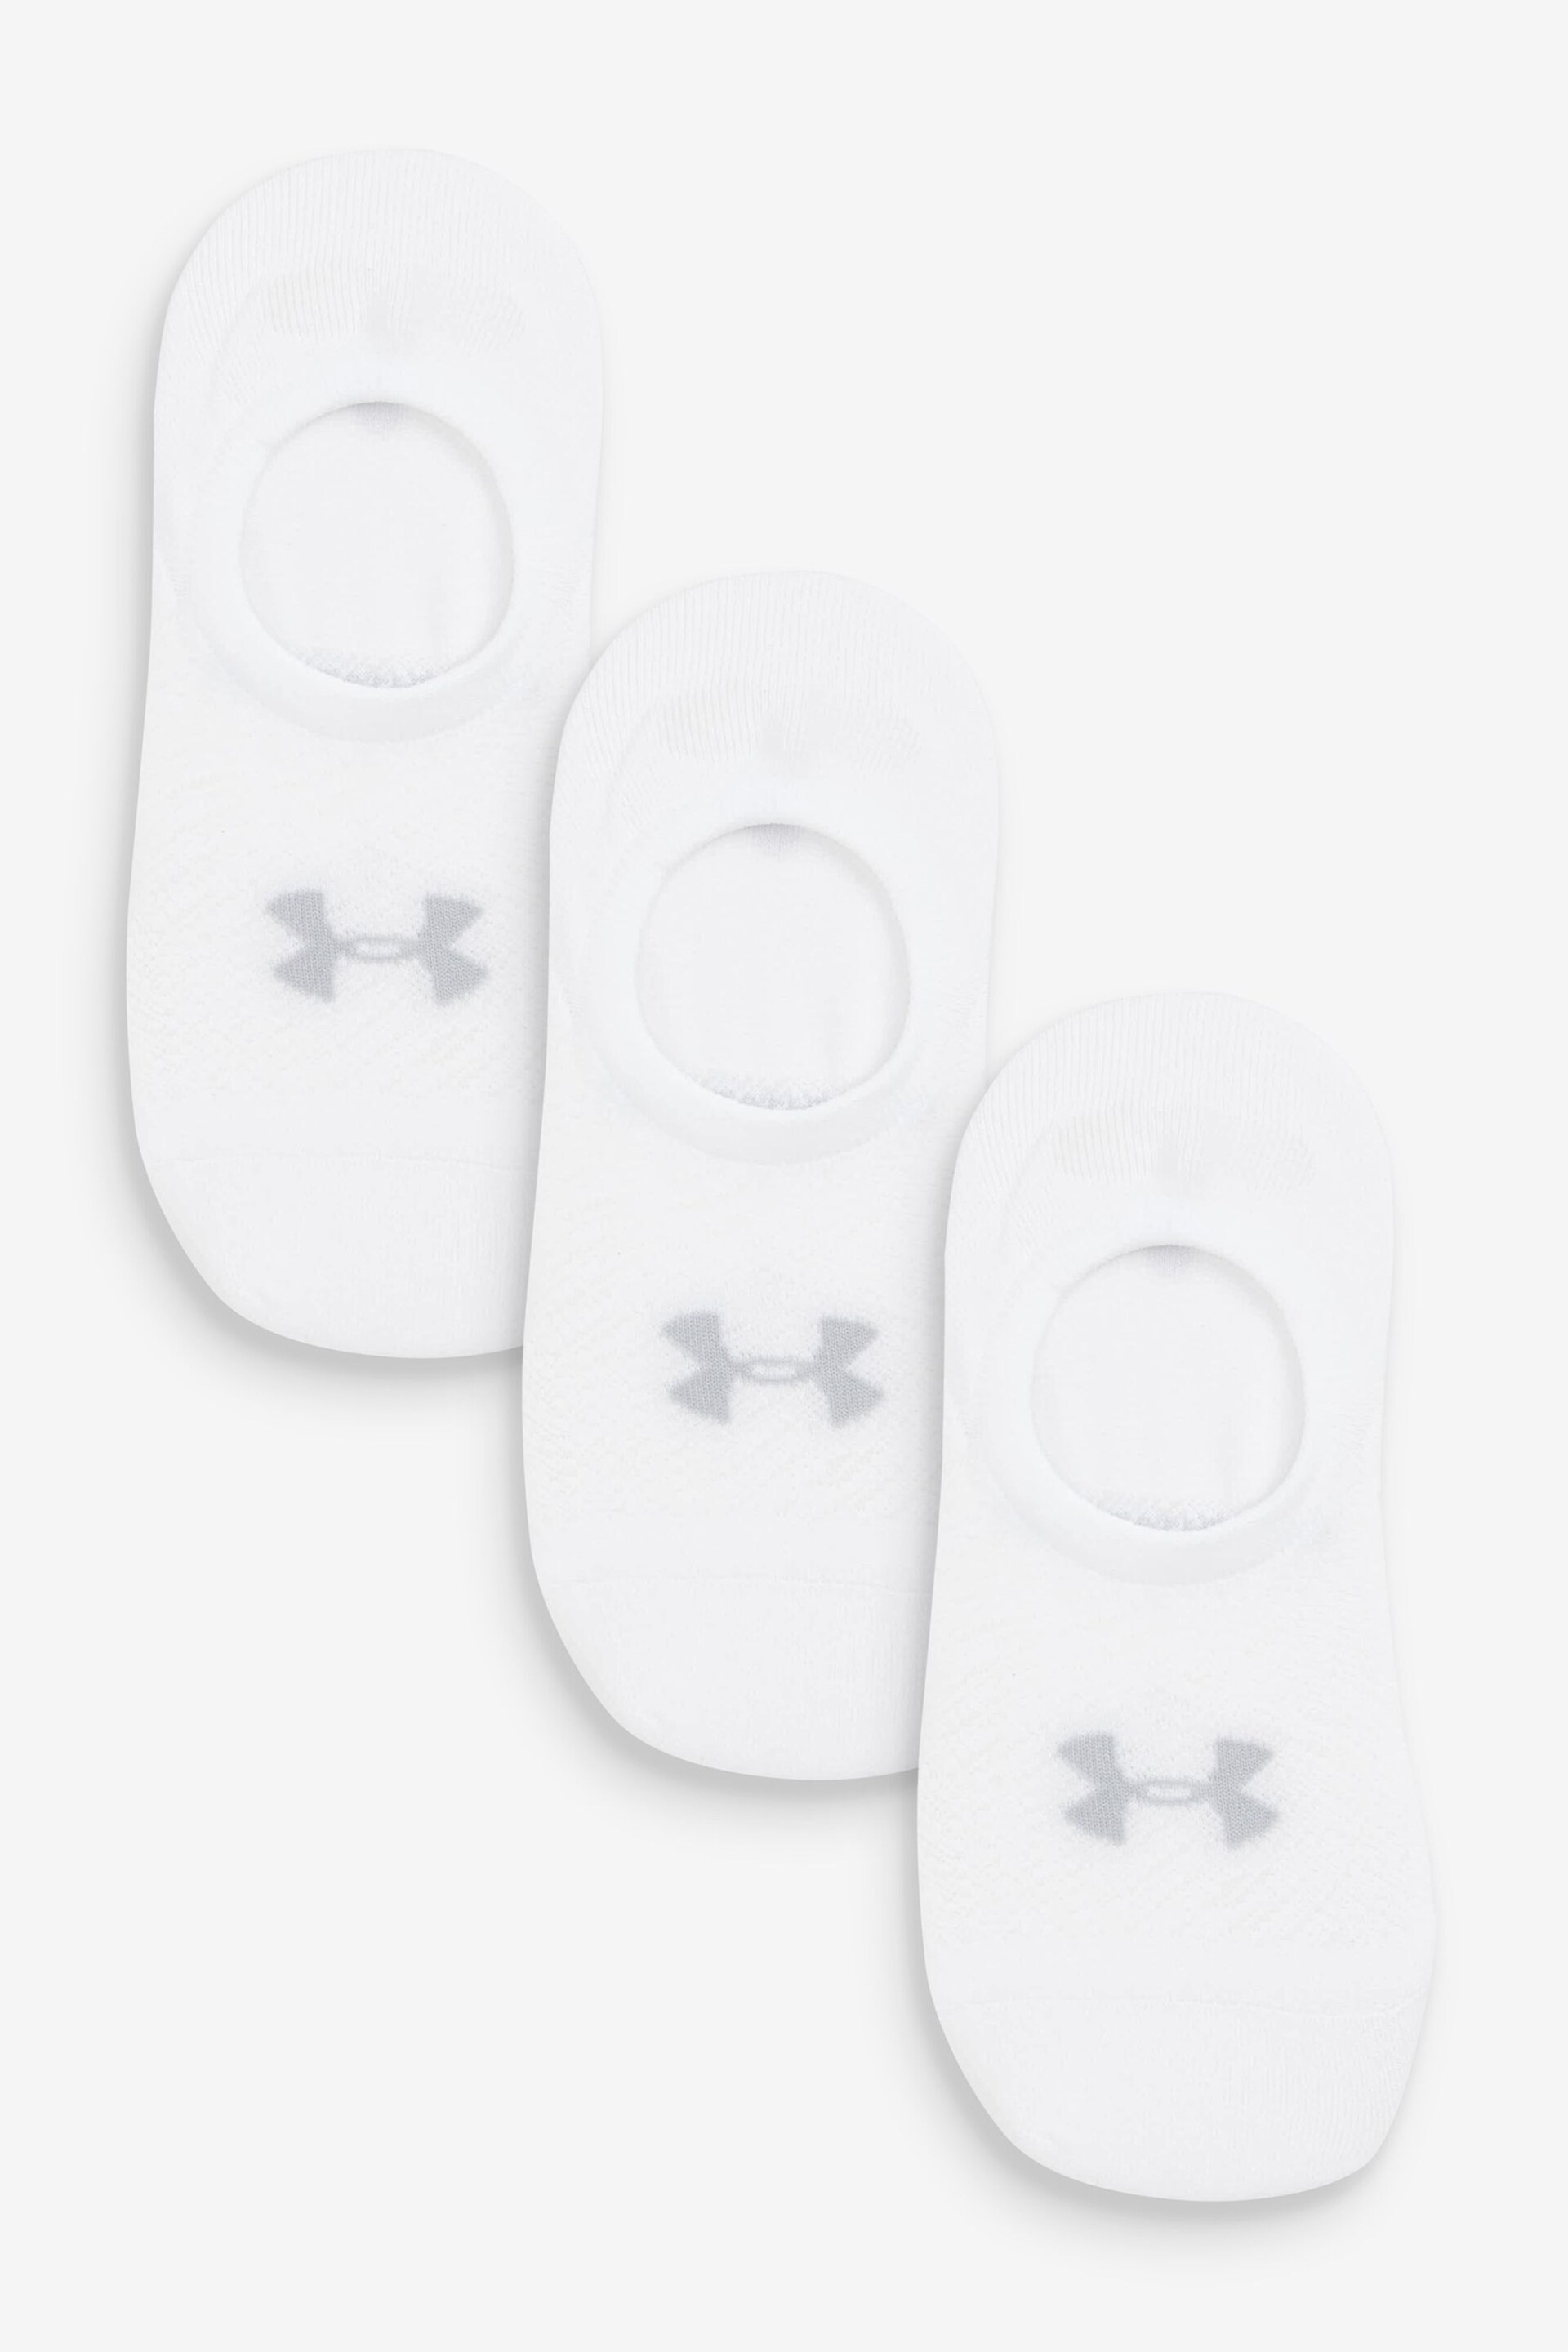 Under Armour Breathe Lite Ultra Low White Socks - Image 1 of 2